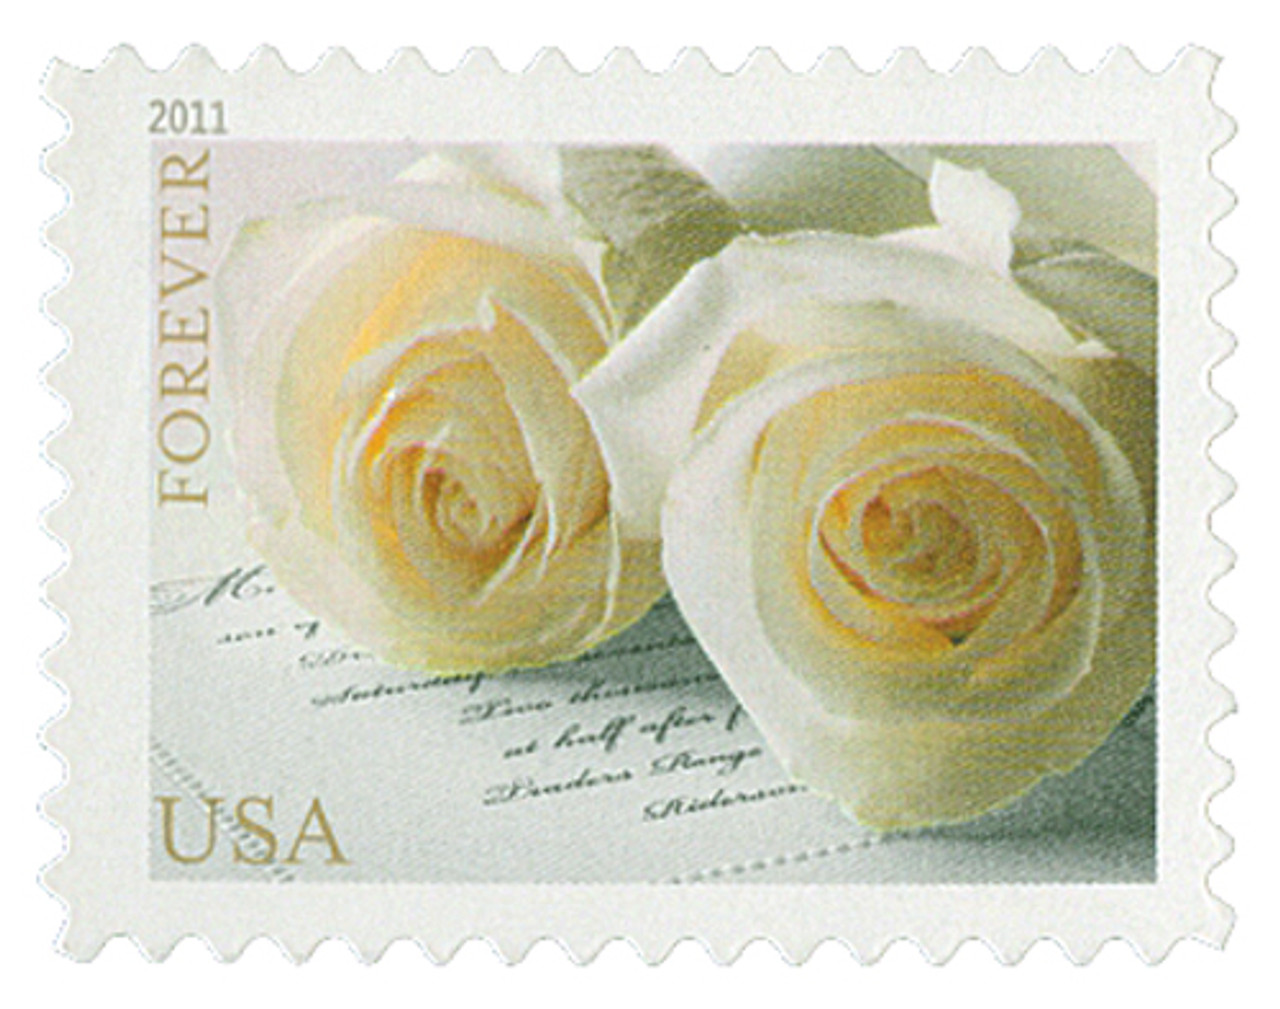 3836/5458 - 2004-20 Wedding Series, set of 26 stamps - Mystic Stamp Company